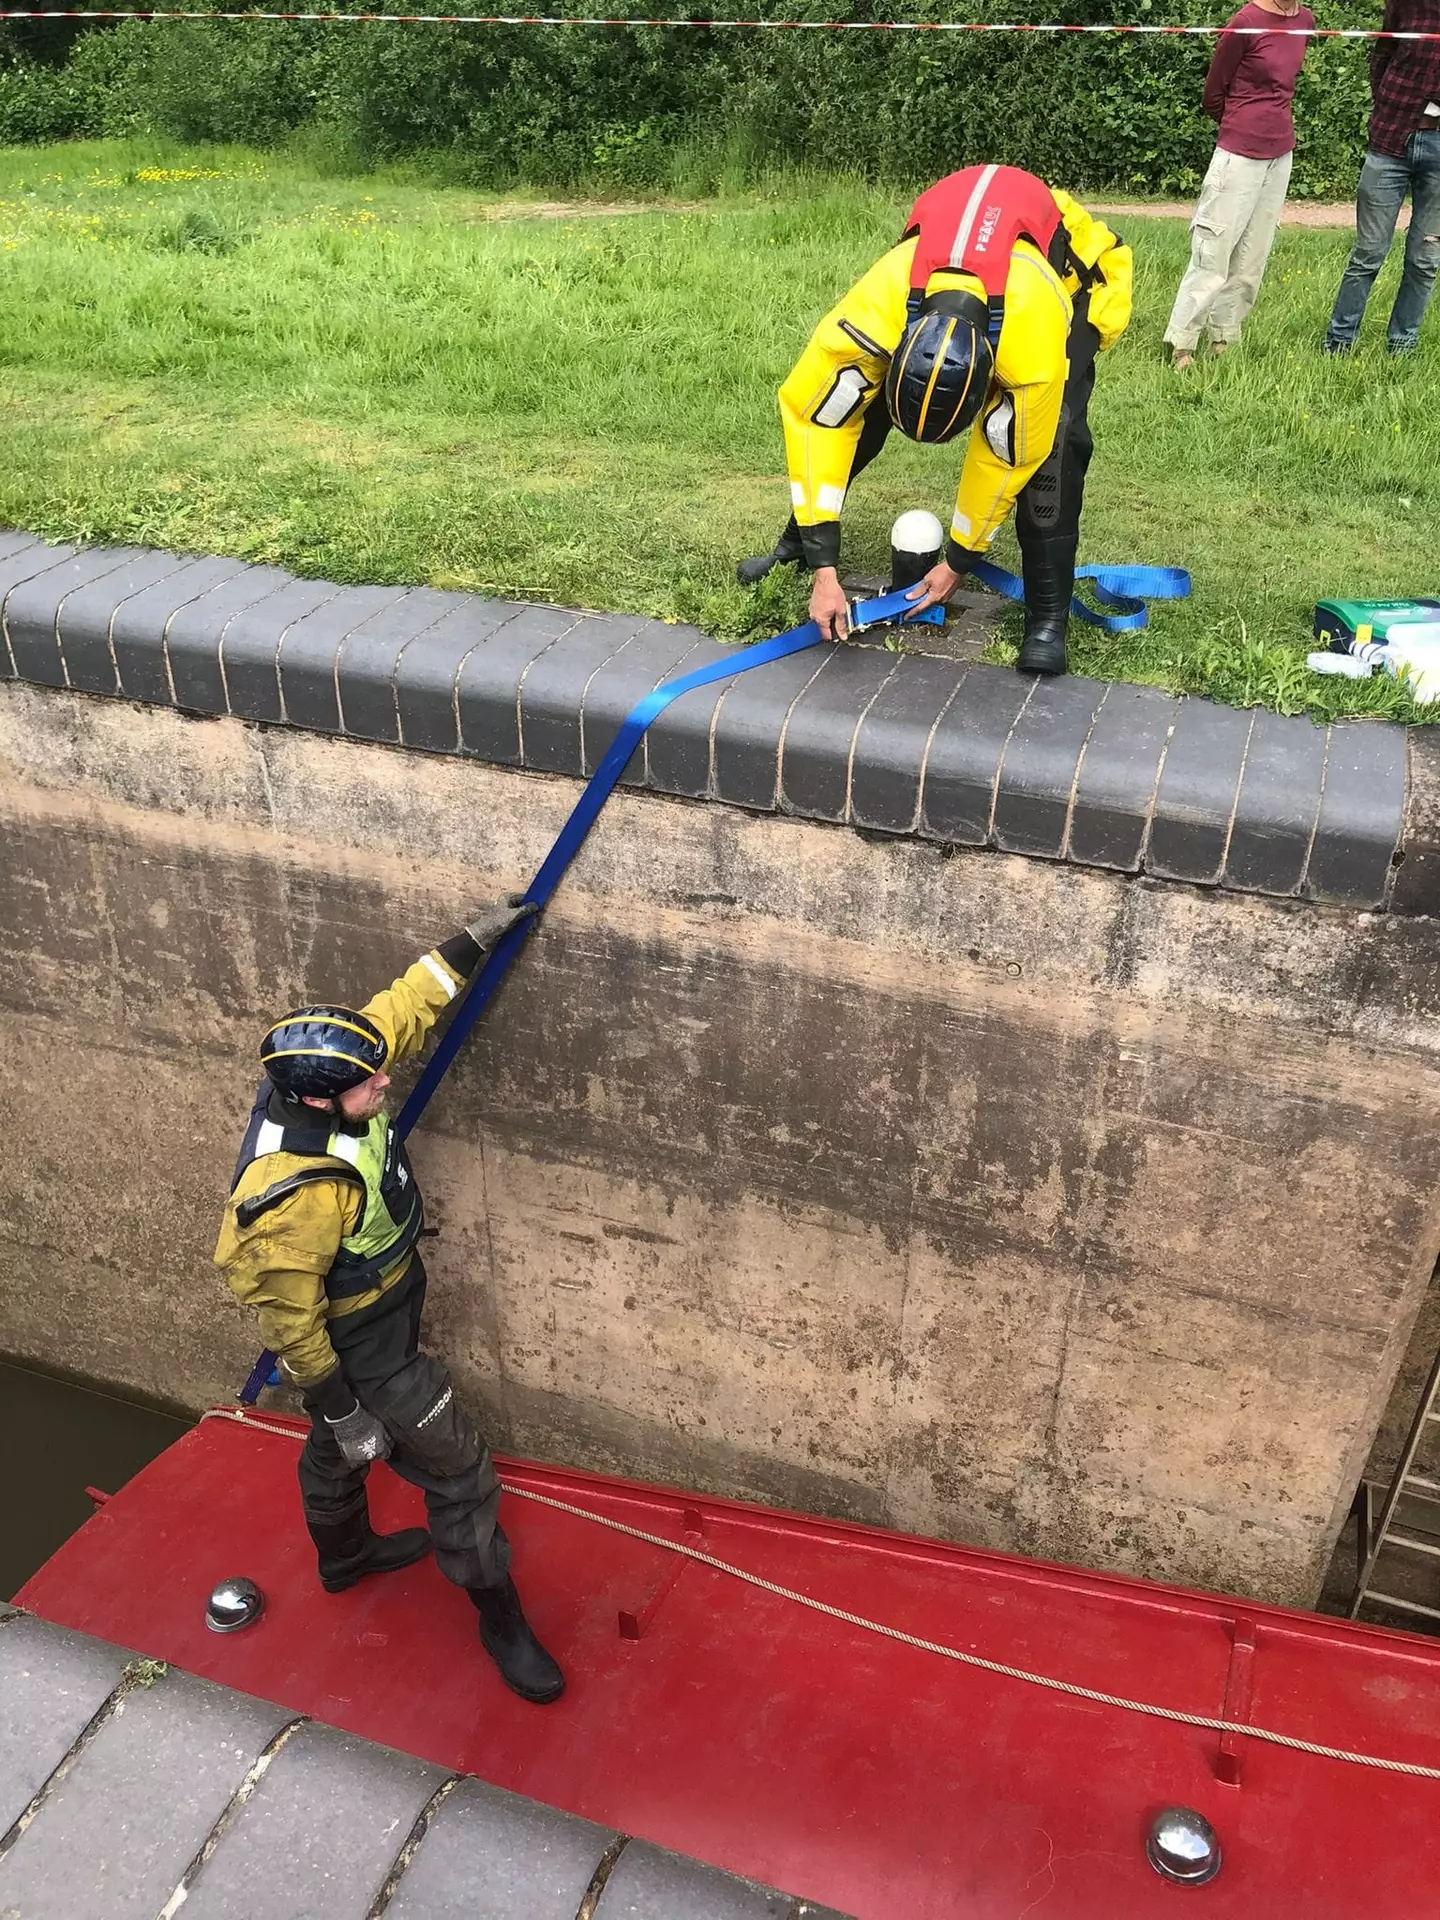 A rescue team were called out to deal with the sunken boat.